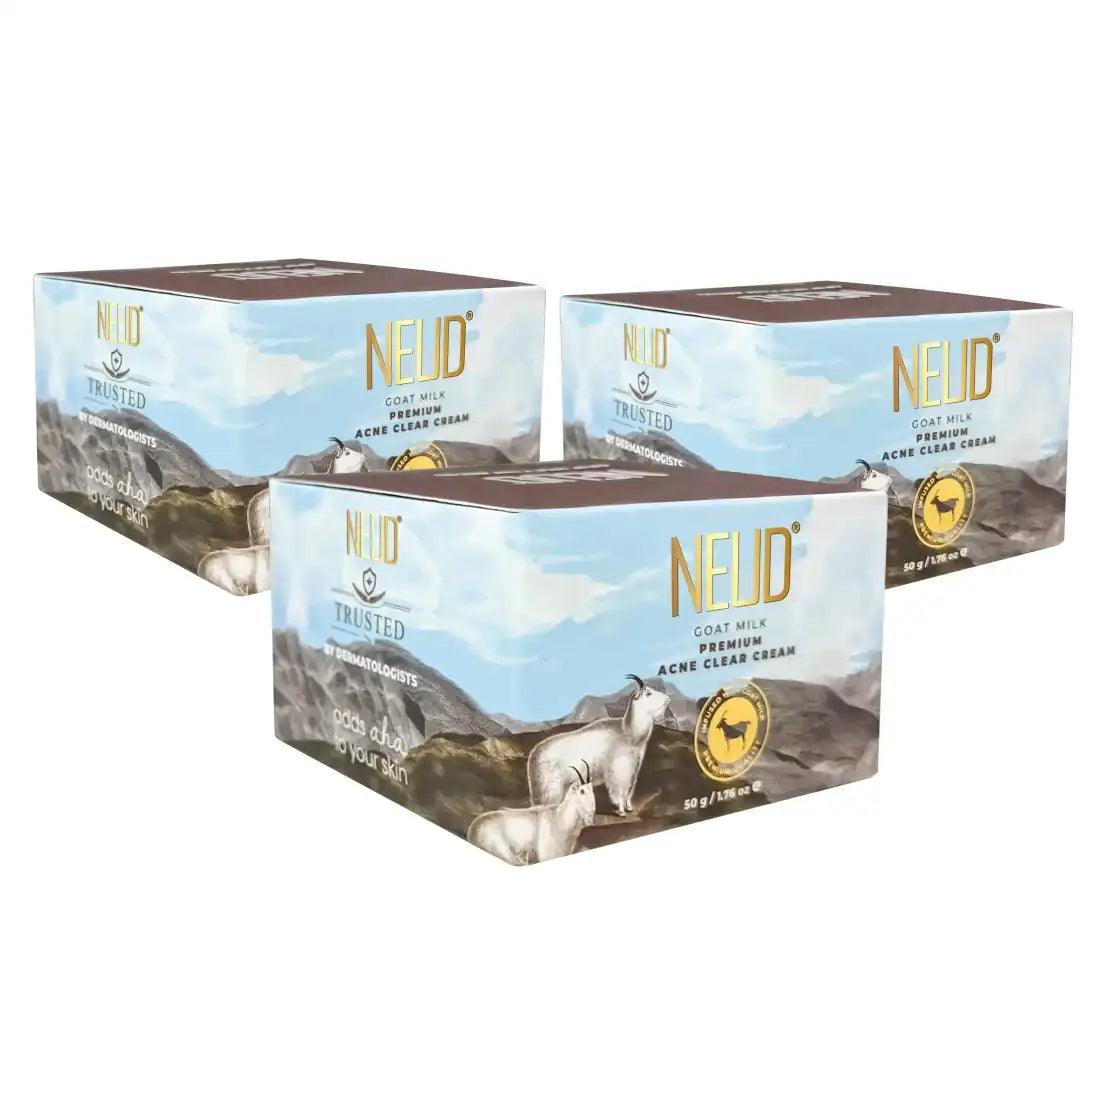 Buy 3 Packs NEUD Goat Milk Acne Clear Cream 50g for Men and Women Directly From Company - everteen-neud.com